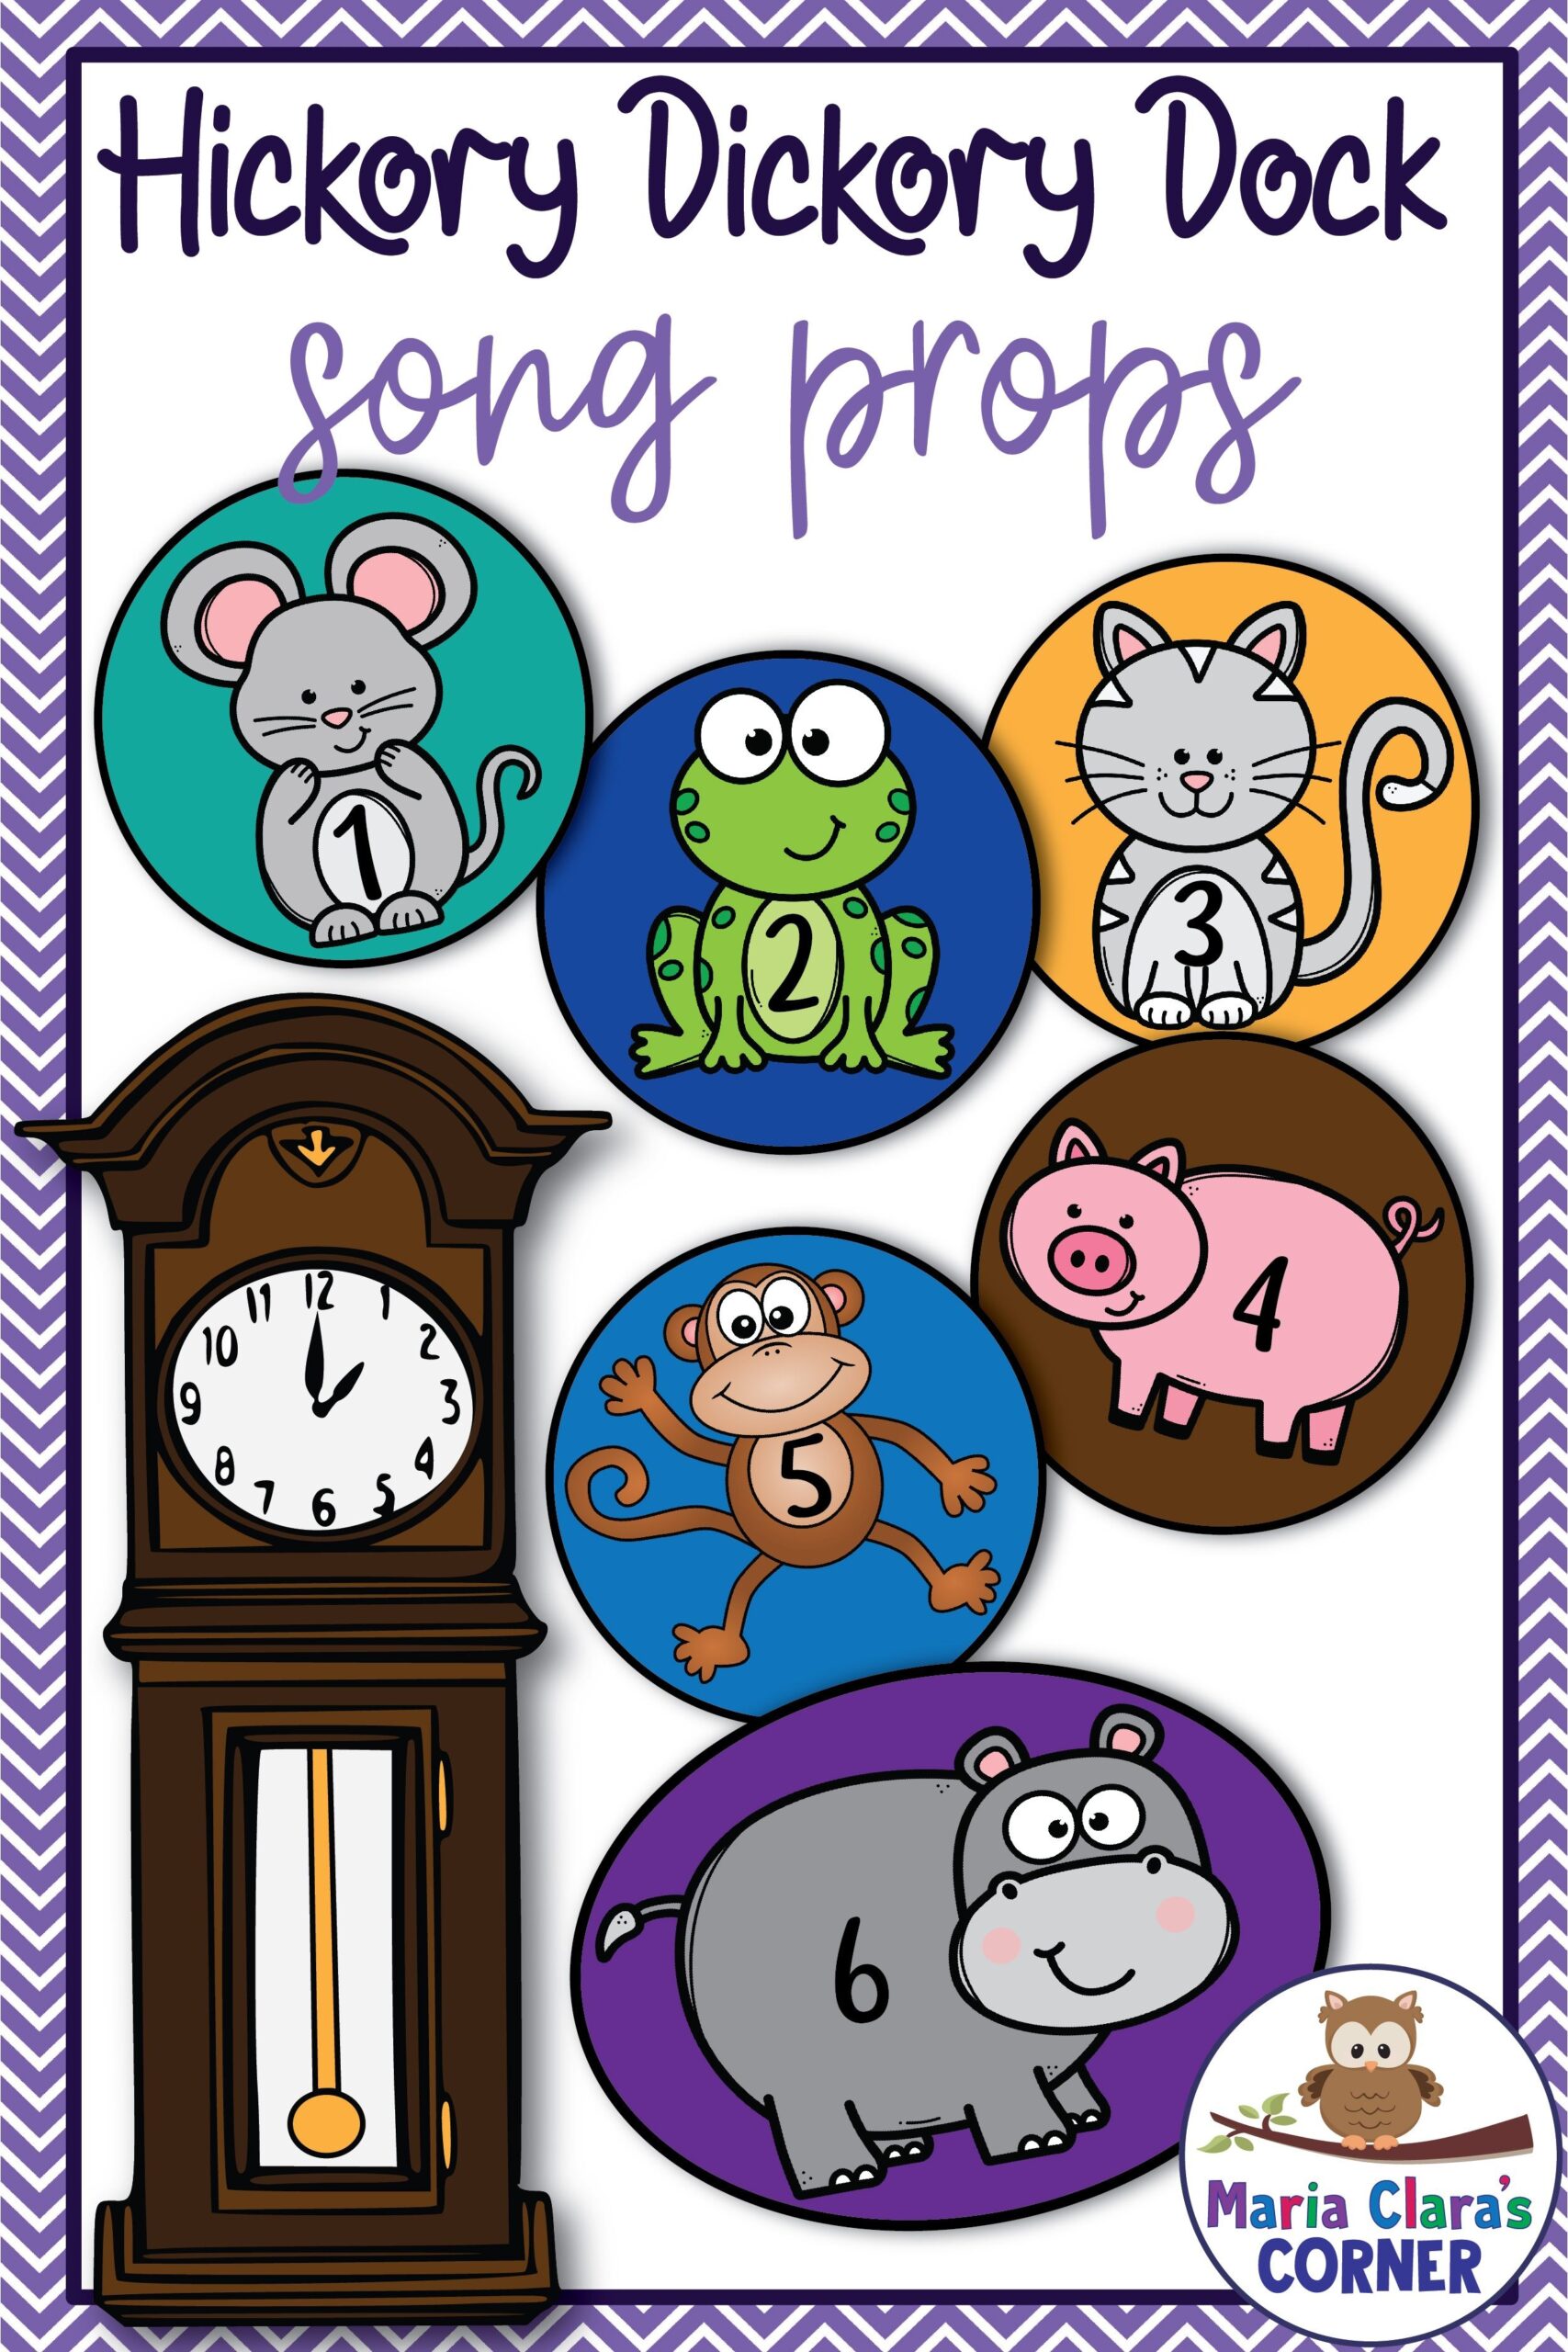 Hickory Dickory Dock Nursery Rhyme Song Props Nursery Rhymes Activities Nursery Rhymes Preschool Activities Nursery Rhyme Crafts